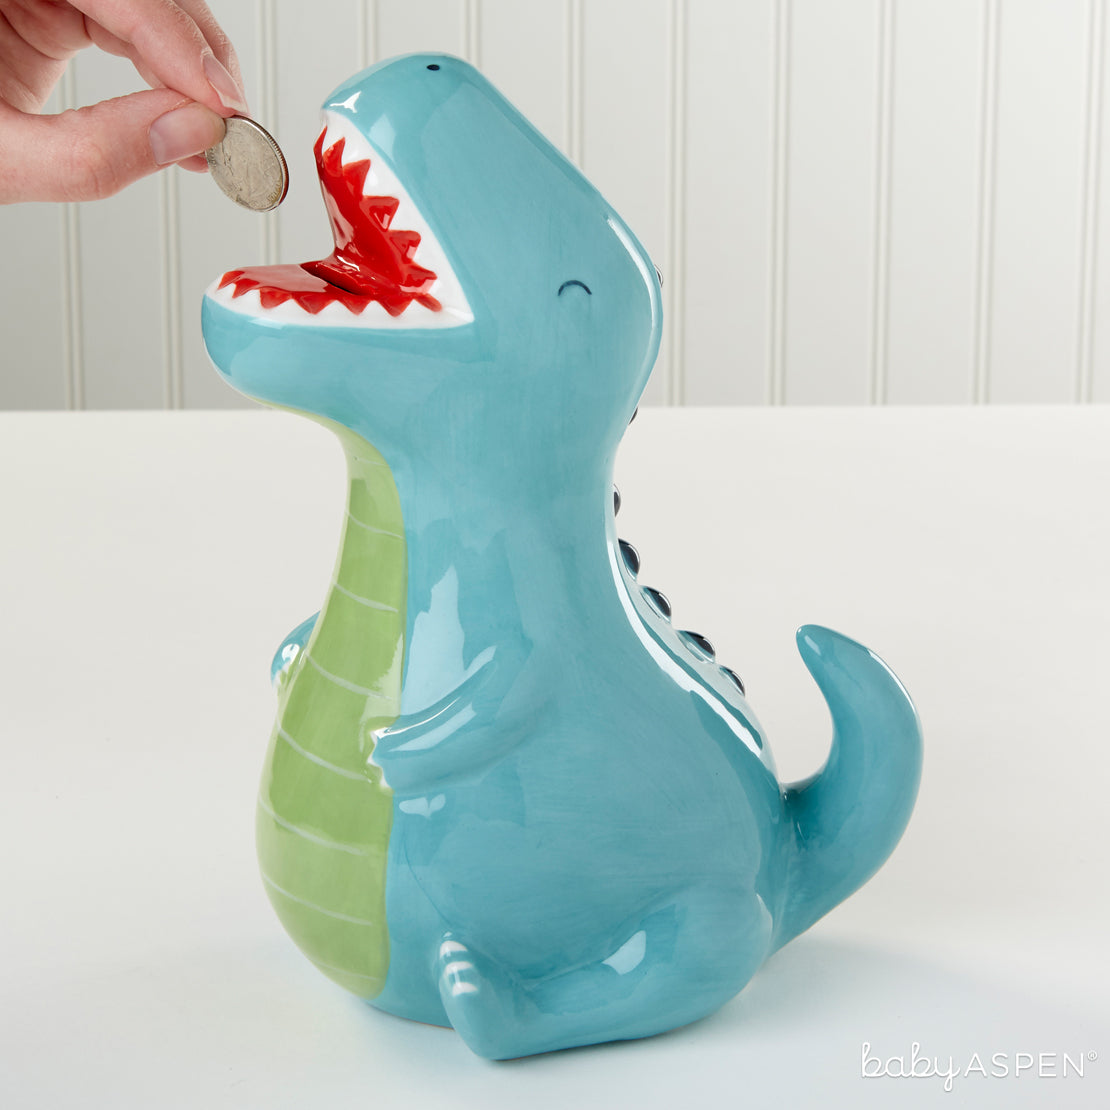 Dinosaur Bank | Dino-mite Gifts For Baby | Baby Aspen